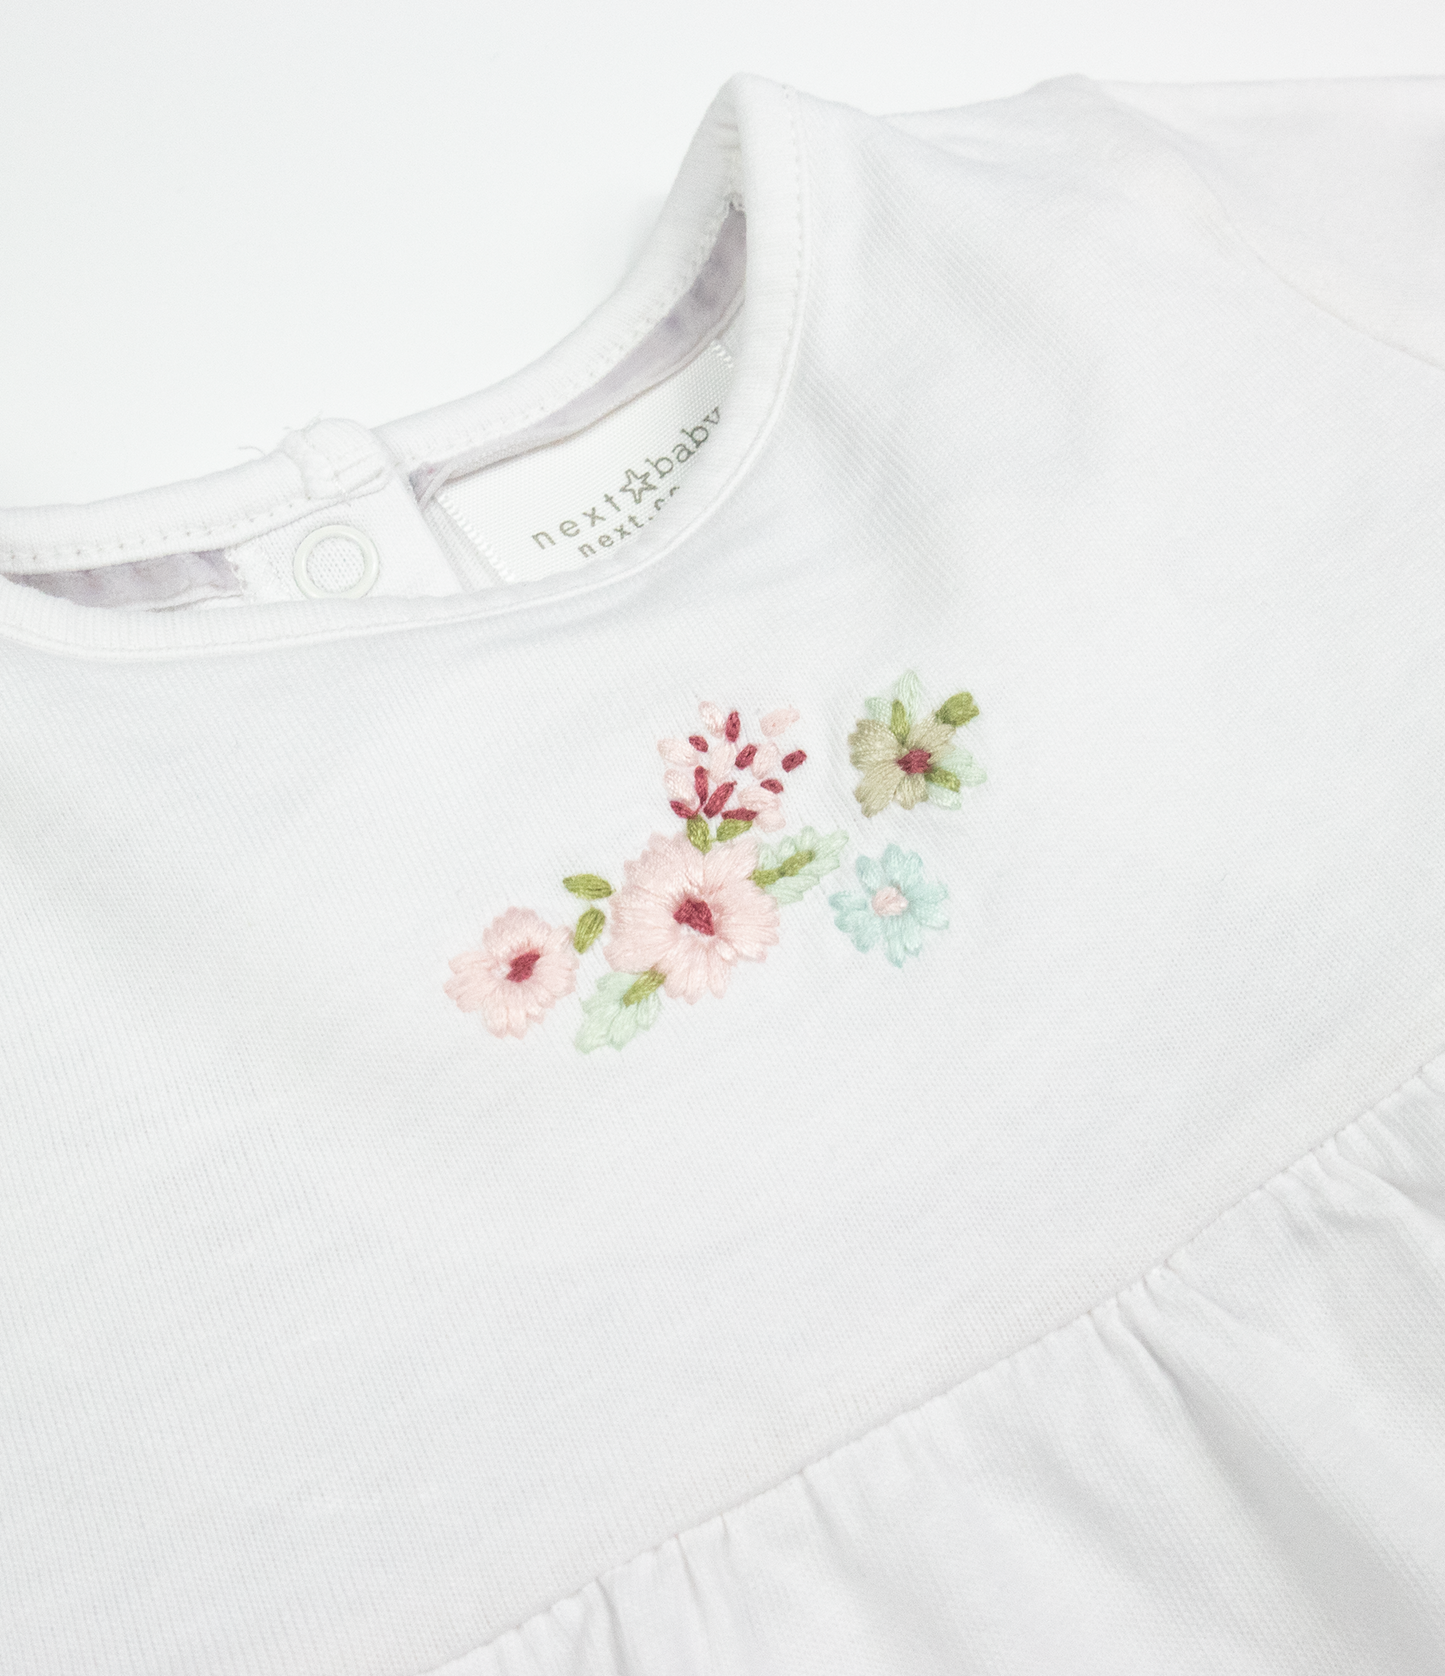 Embroidered skirted top